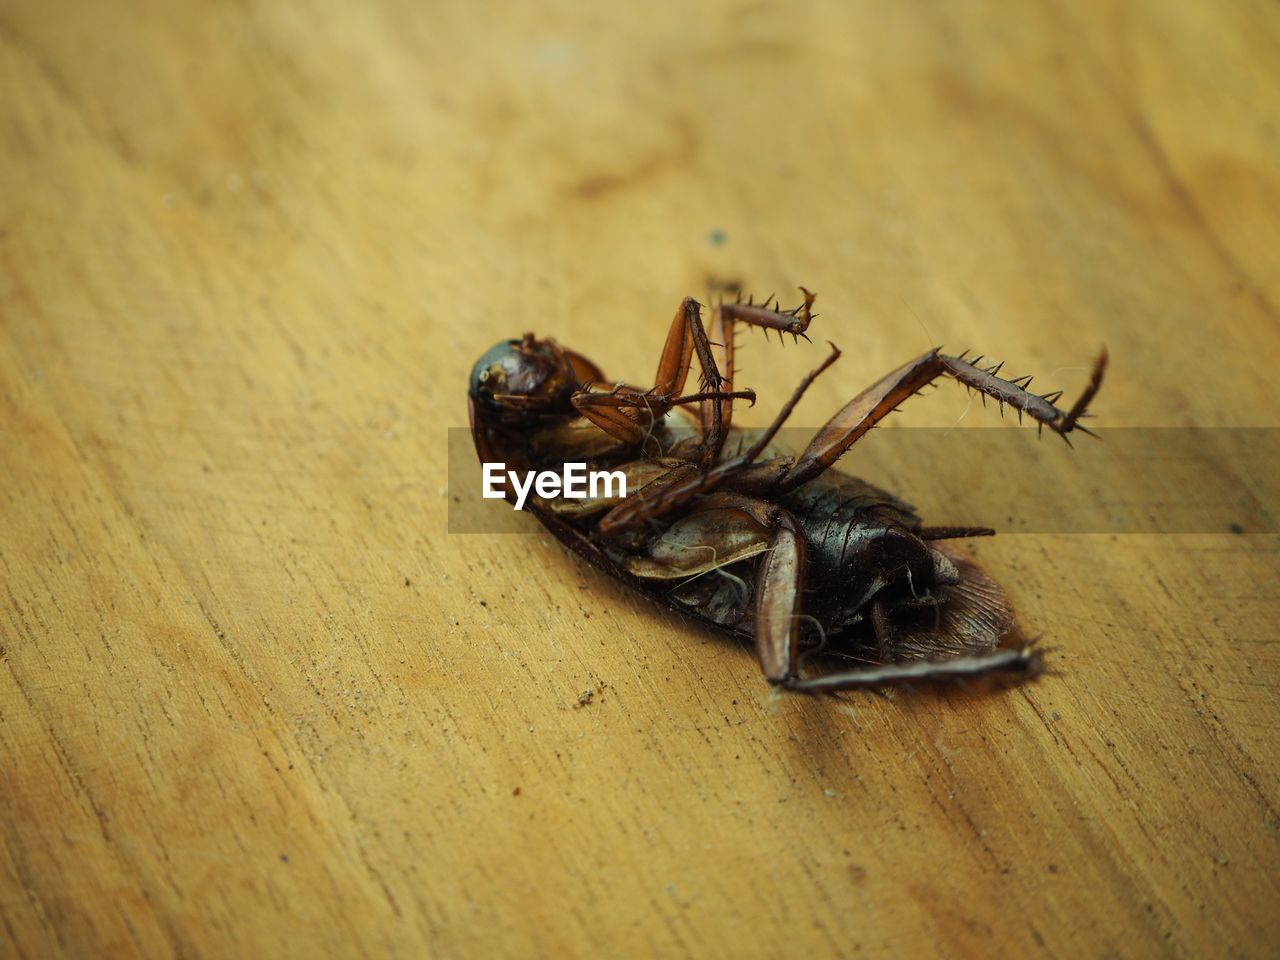 HIGH ANGLE VIEW OF SPIDER ON WOODEN TABLE